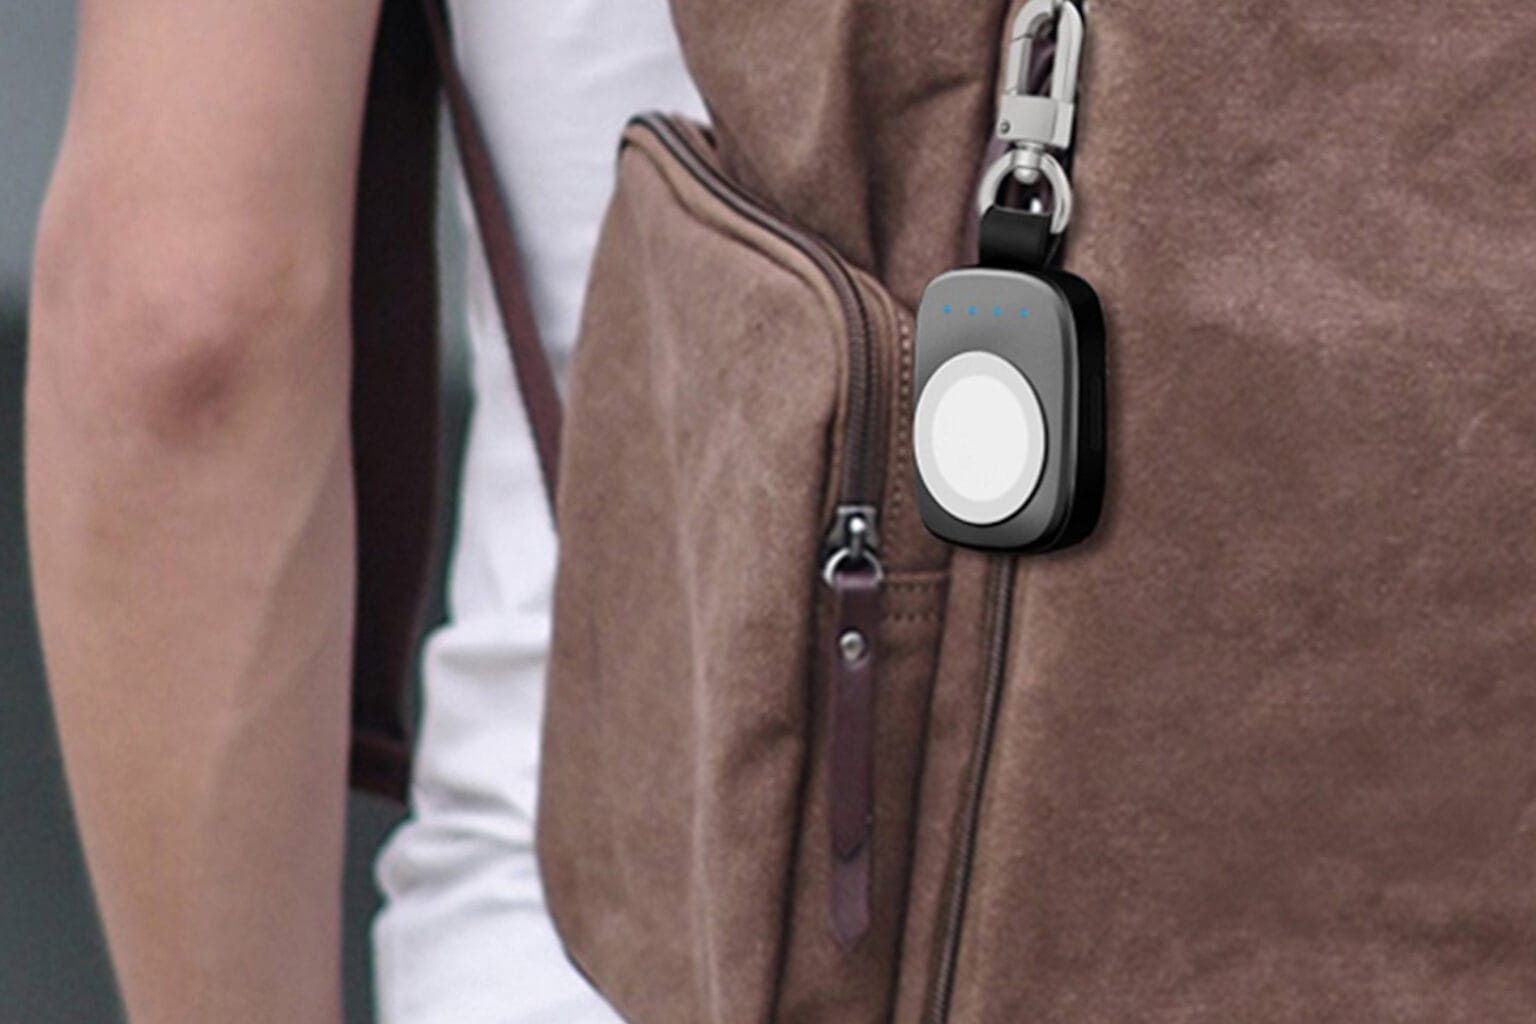 This keychain powers up your apple watch.